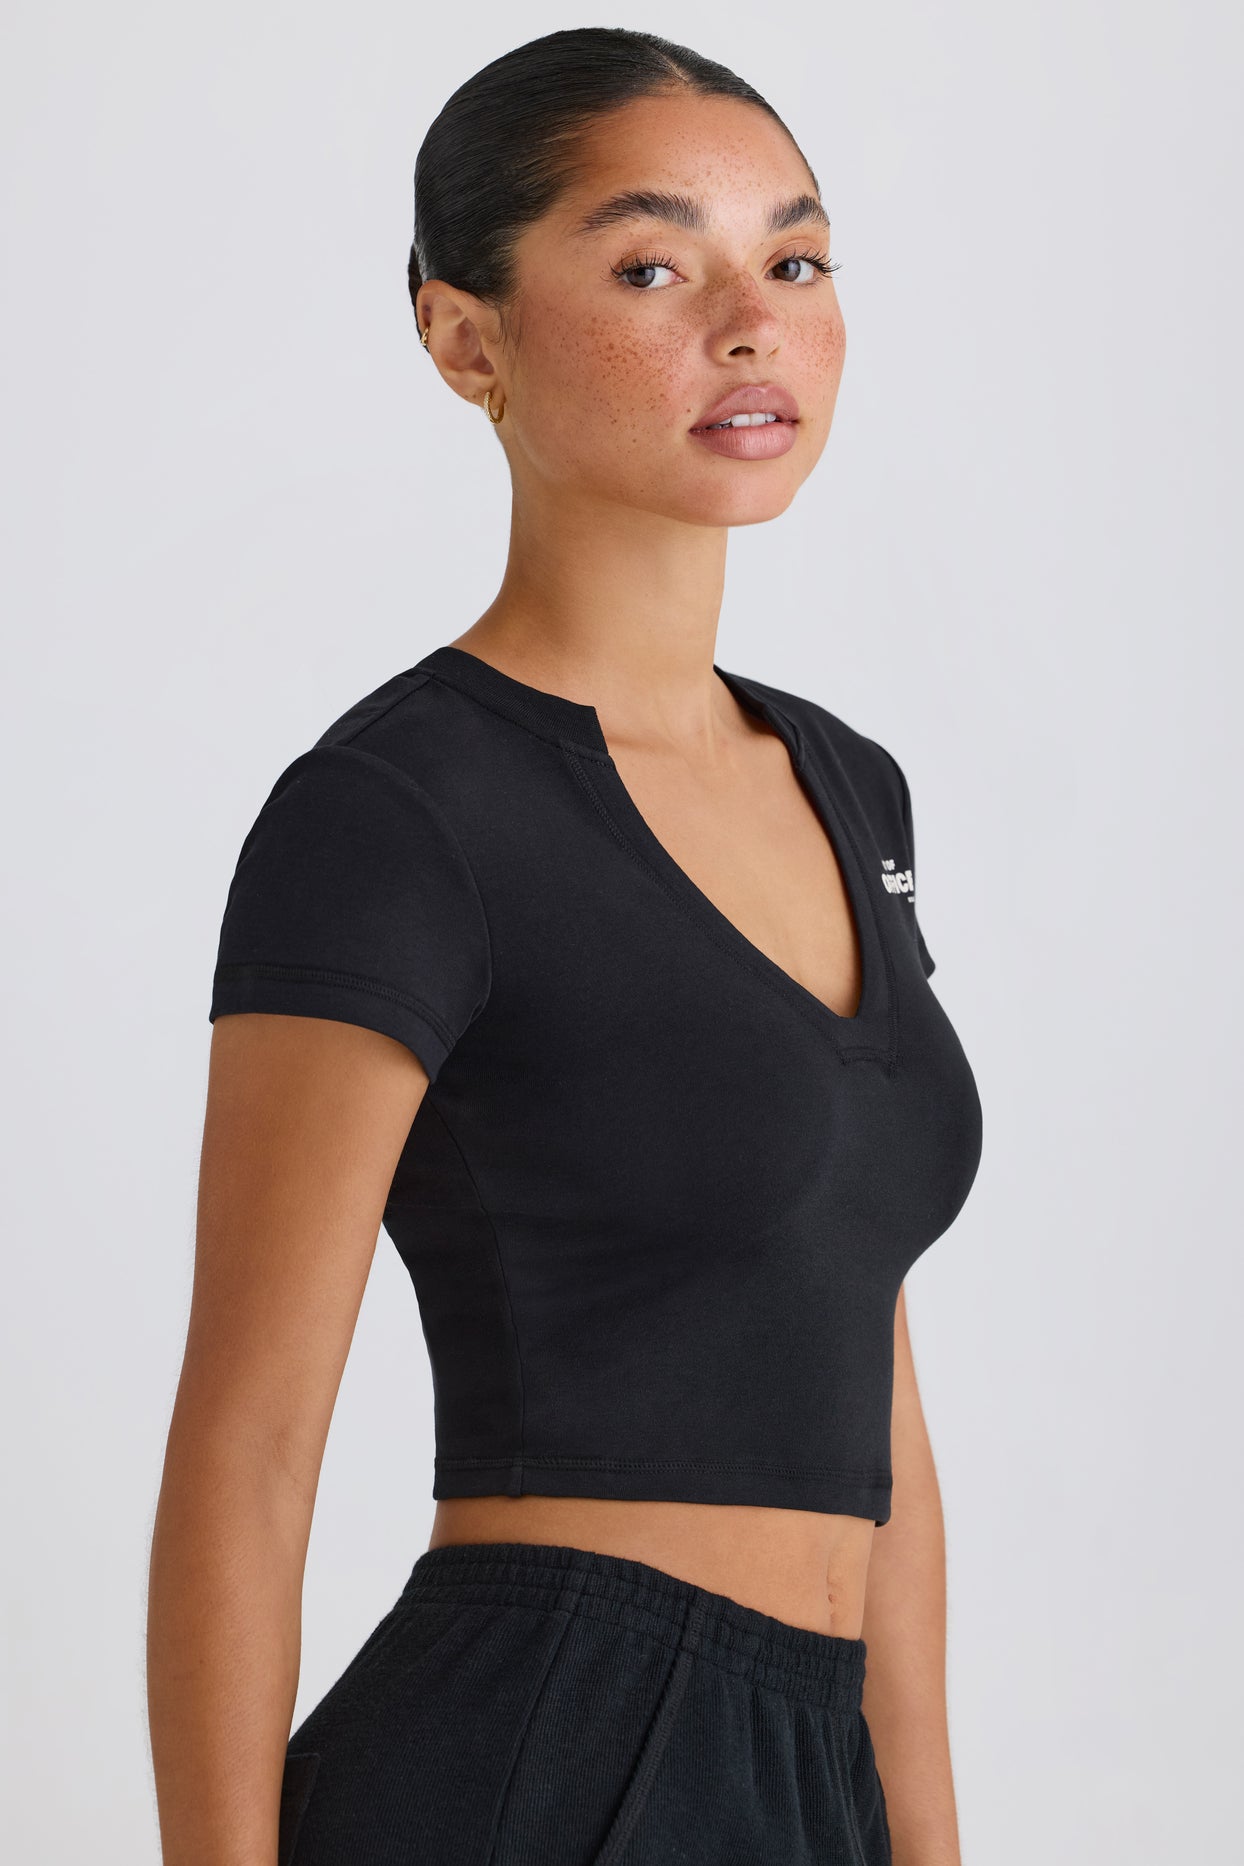 Graphic-Print Cropped T-Shirt in Black